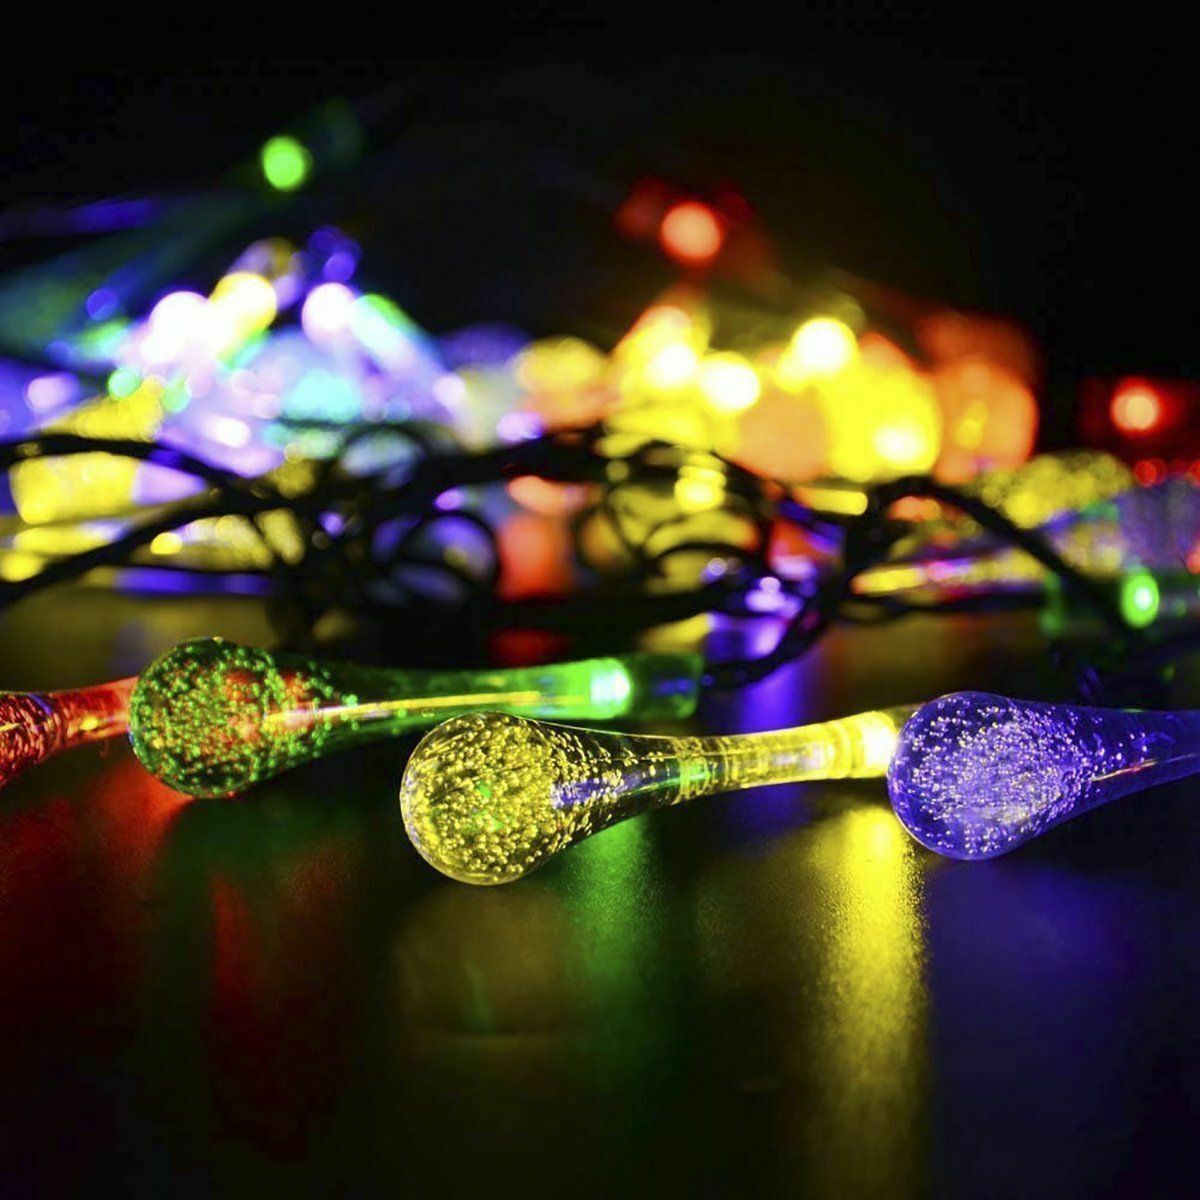 Outdoor Solar String Lights,KINGCOO 20ft 30 LED Love Heart Waterproof Christmas Solar Starry Fairy Decorative String Lights with 8 Modes for Halloween Garden Wedding Party Home Patio Red